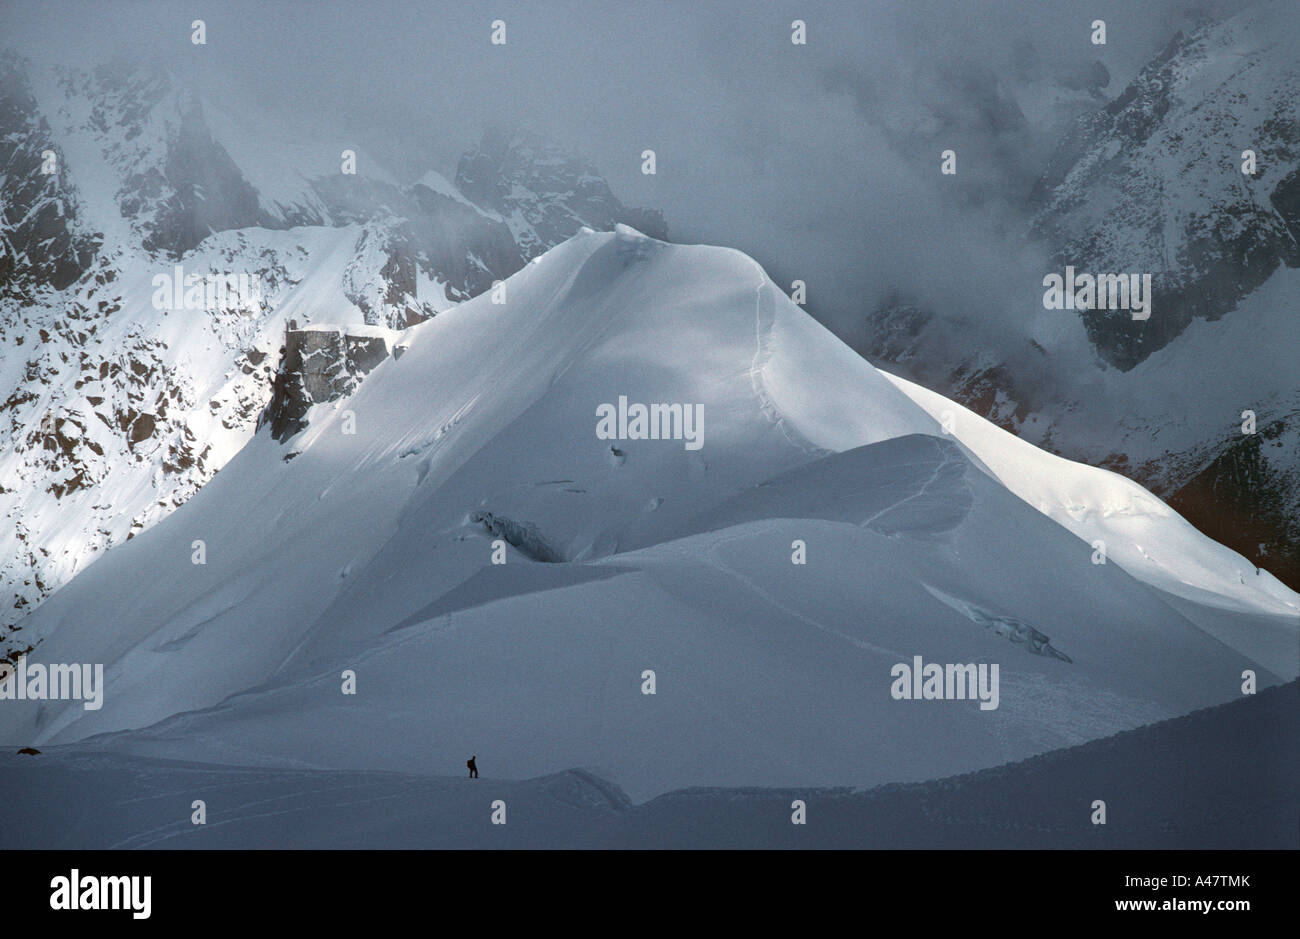 a-lone-climber-high-in-the-french-alps-A